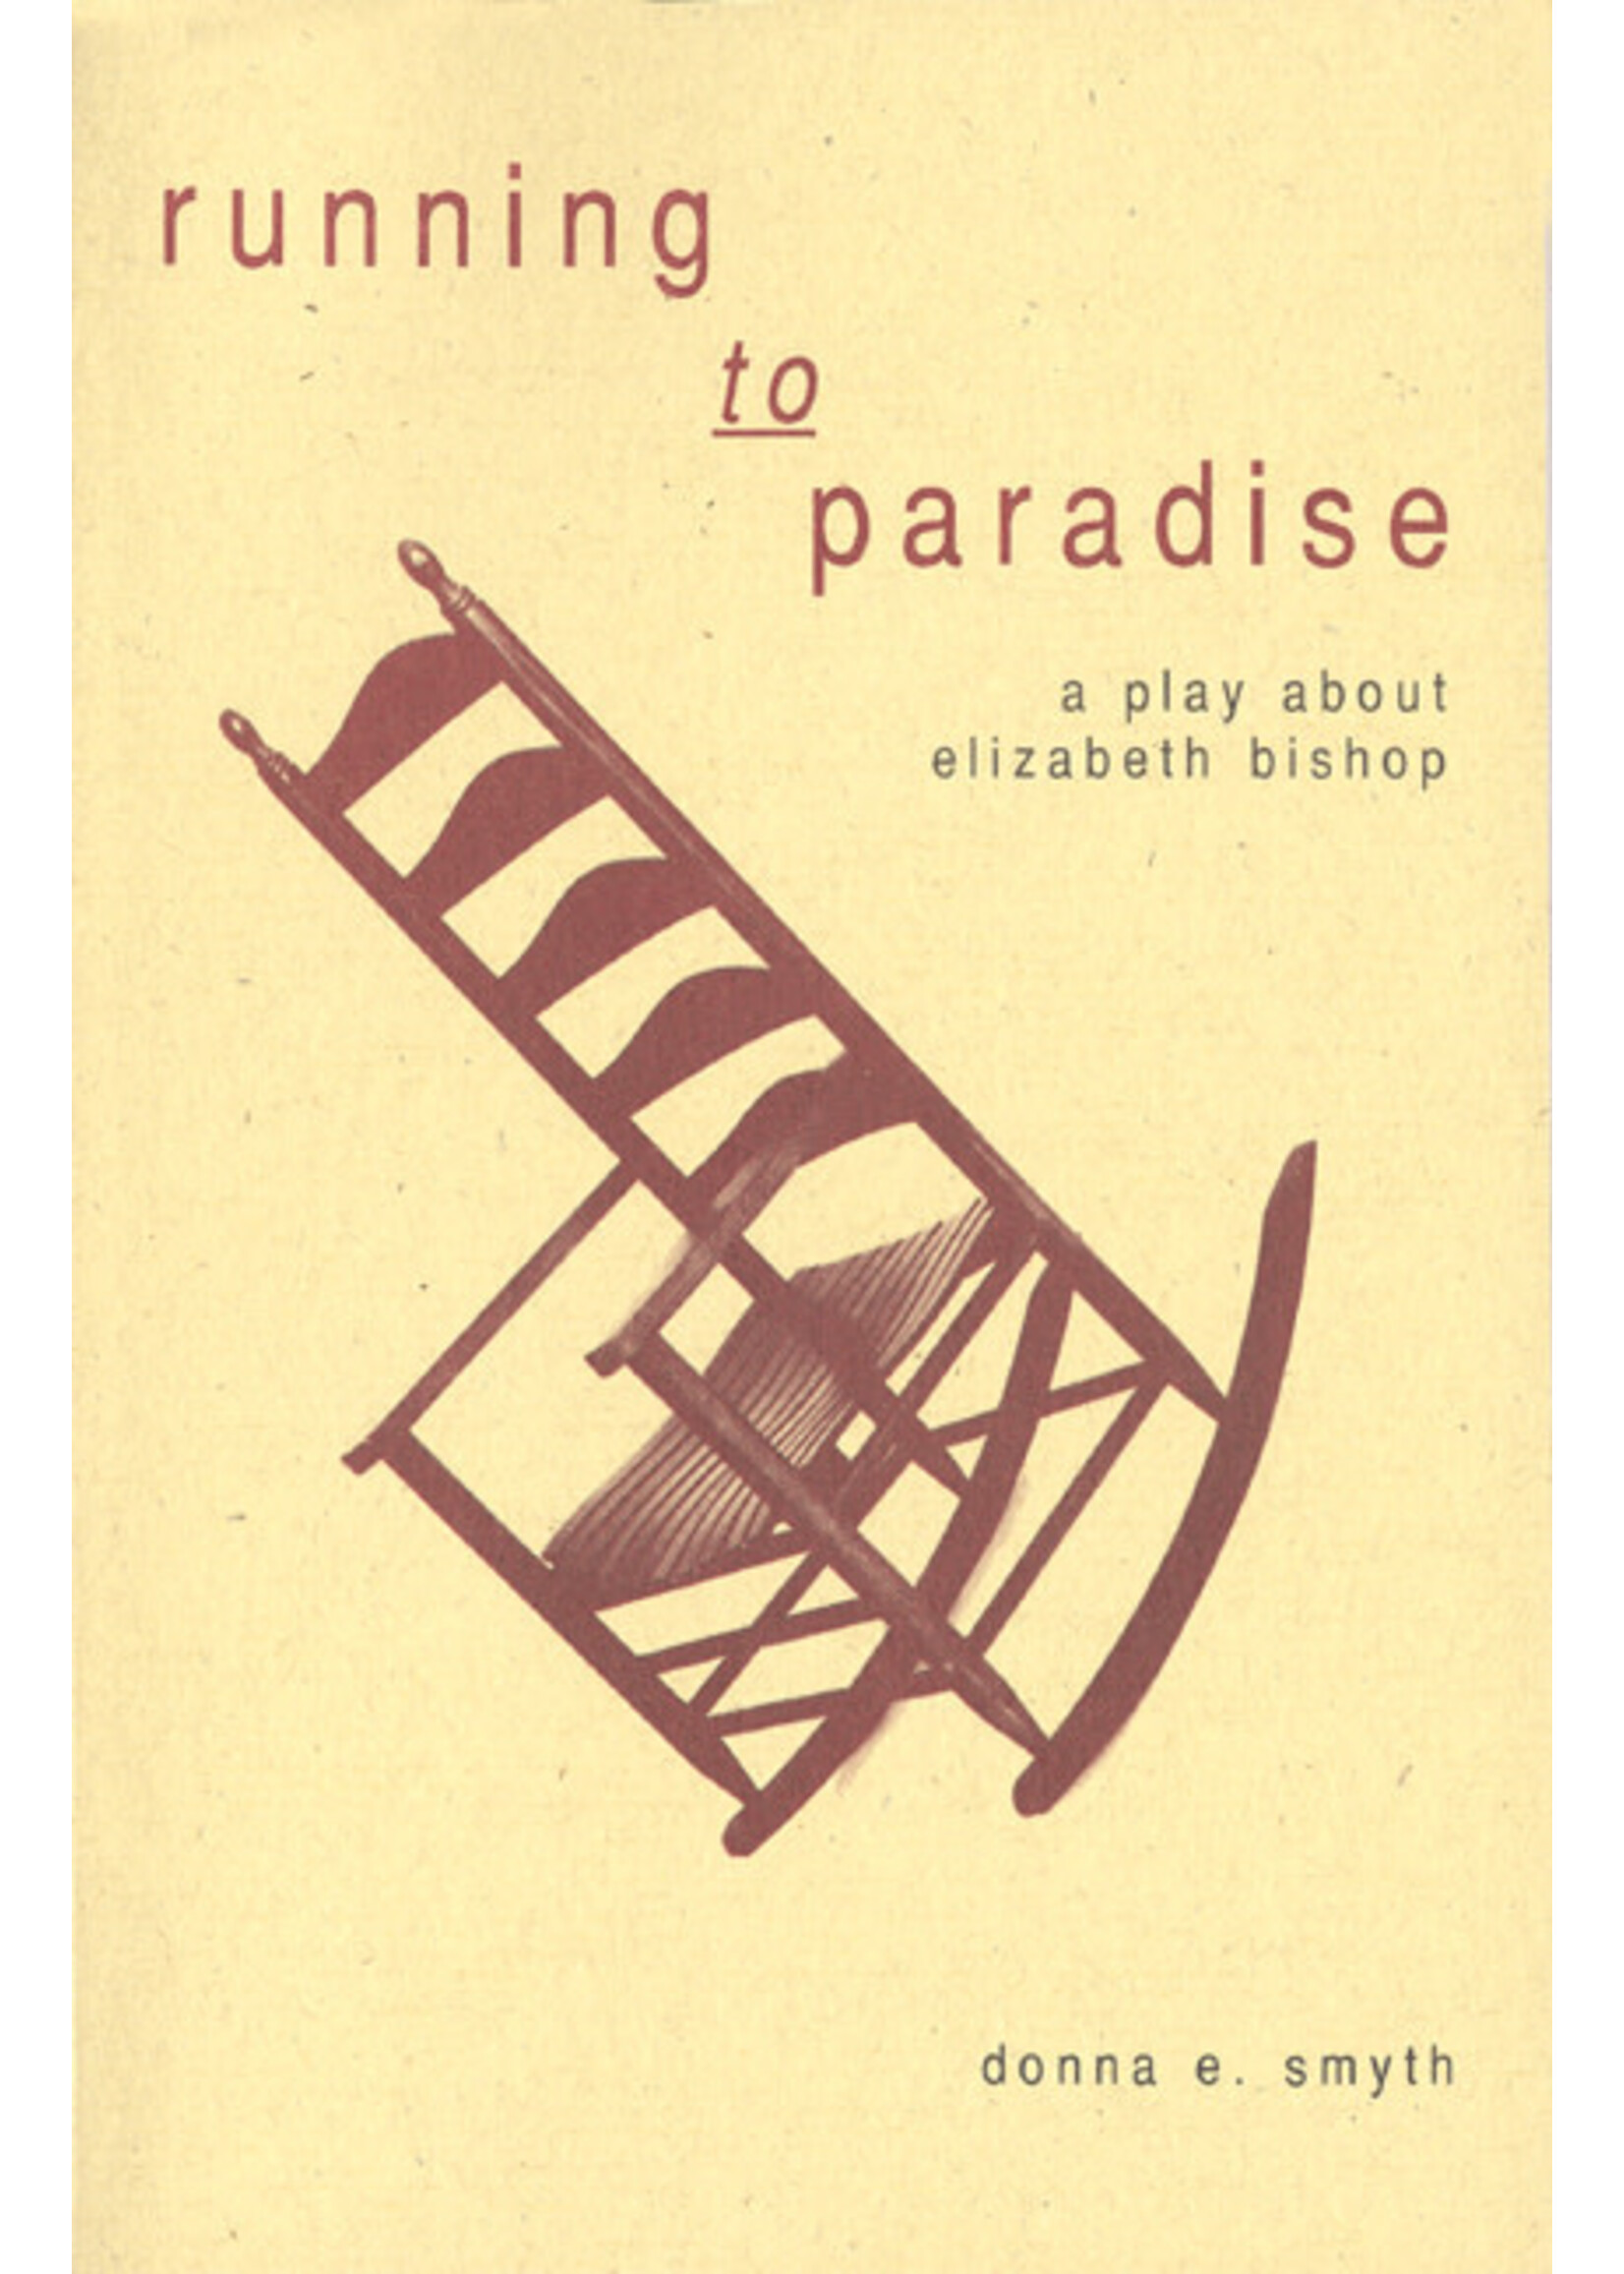 Running to Paradise: A Play About Elizabeth Bishop by Donna Smyth